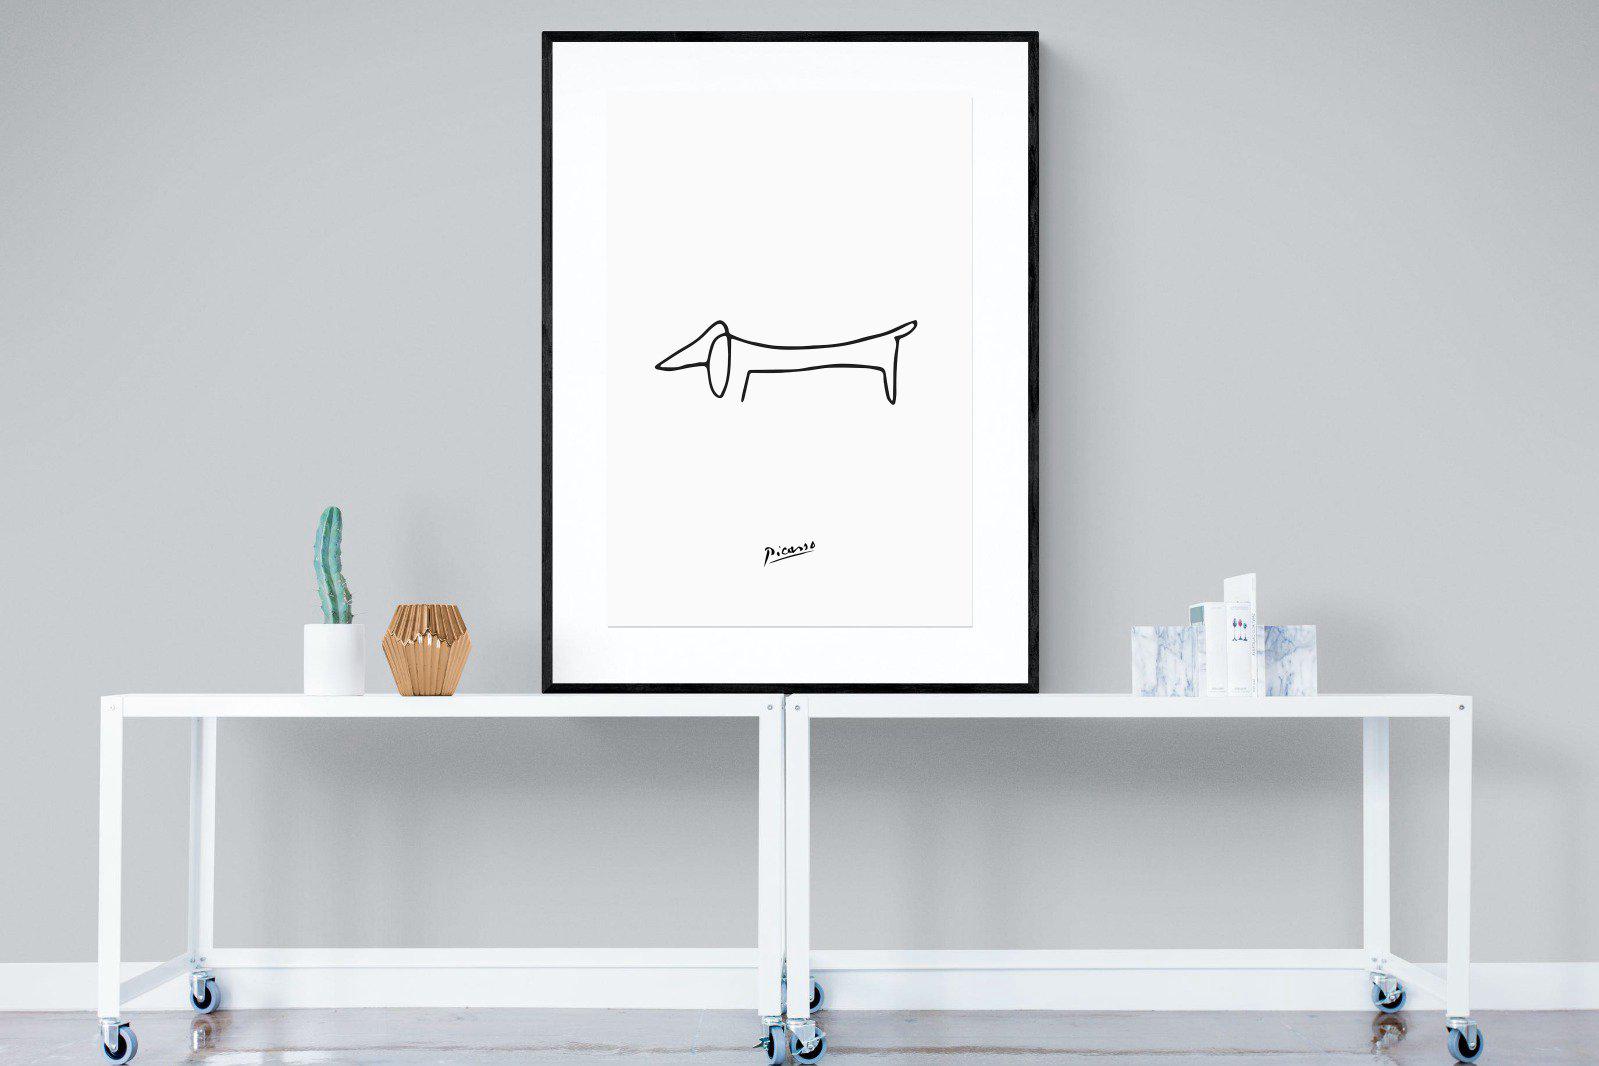 Picasso's Dachshund Wall Art for Sale Online (Framed & Canvas)